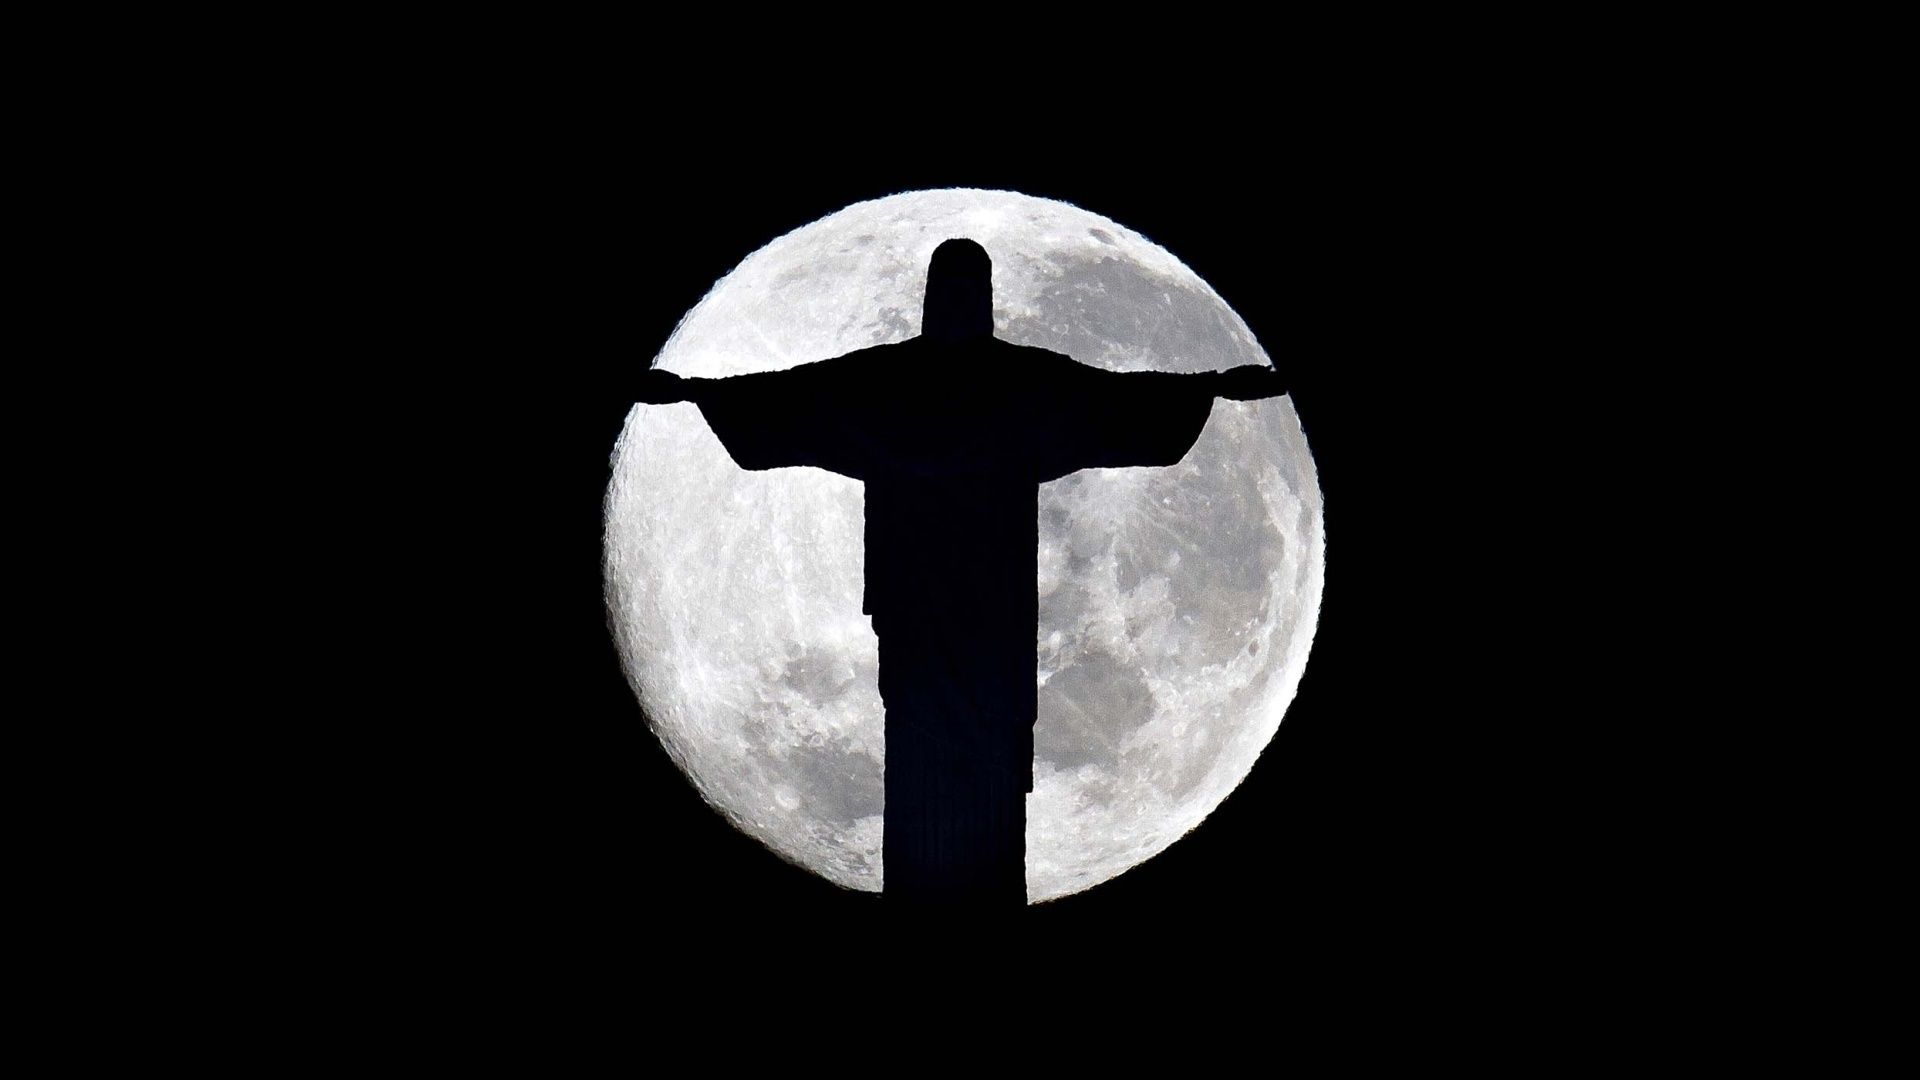 The silhouette of jesus on a hill with moon in background - Jesus